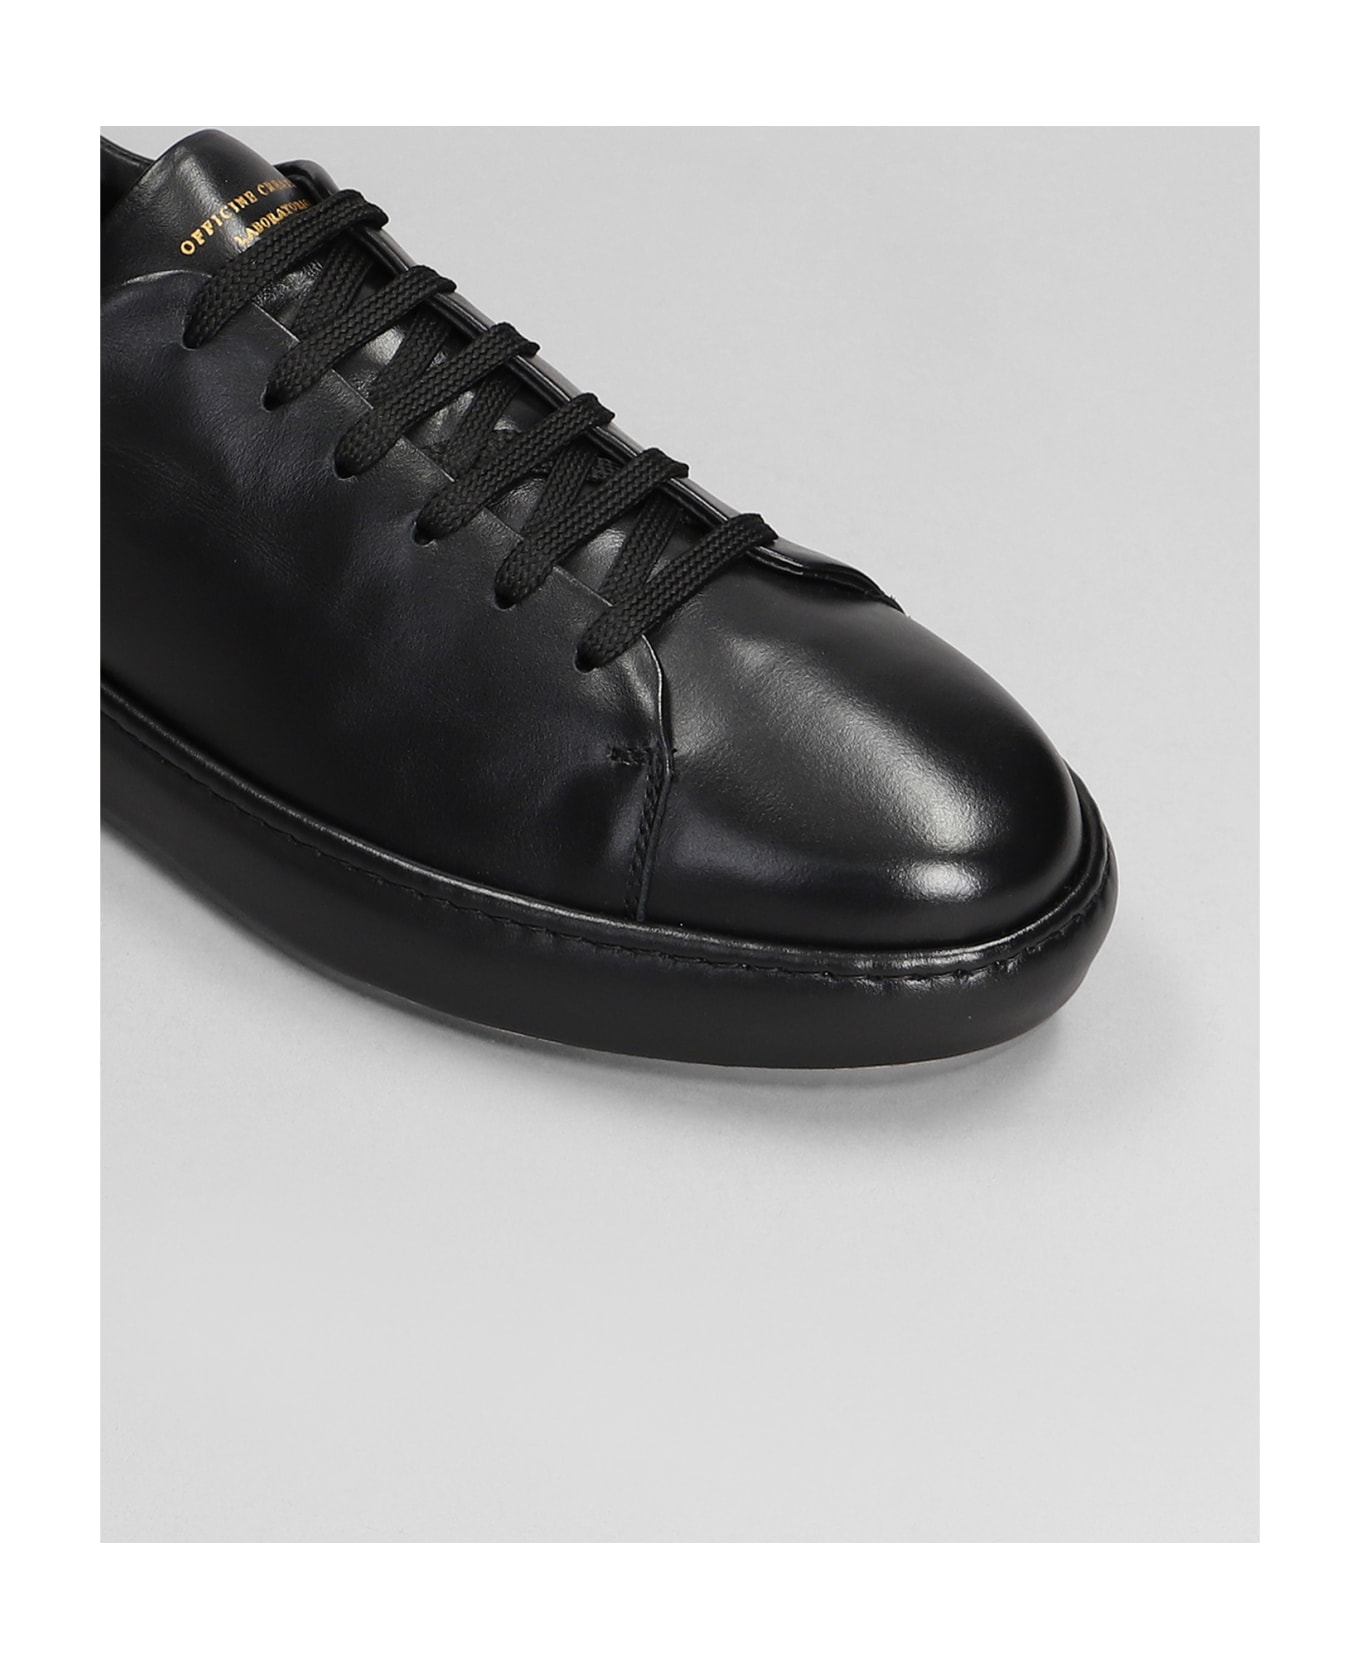 Officine Creative Covered 001 Sneakers In Black Leather - black スニーカー